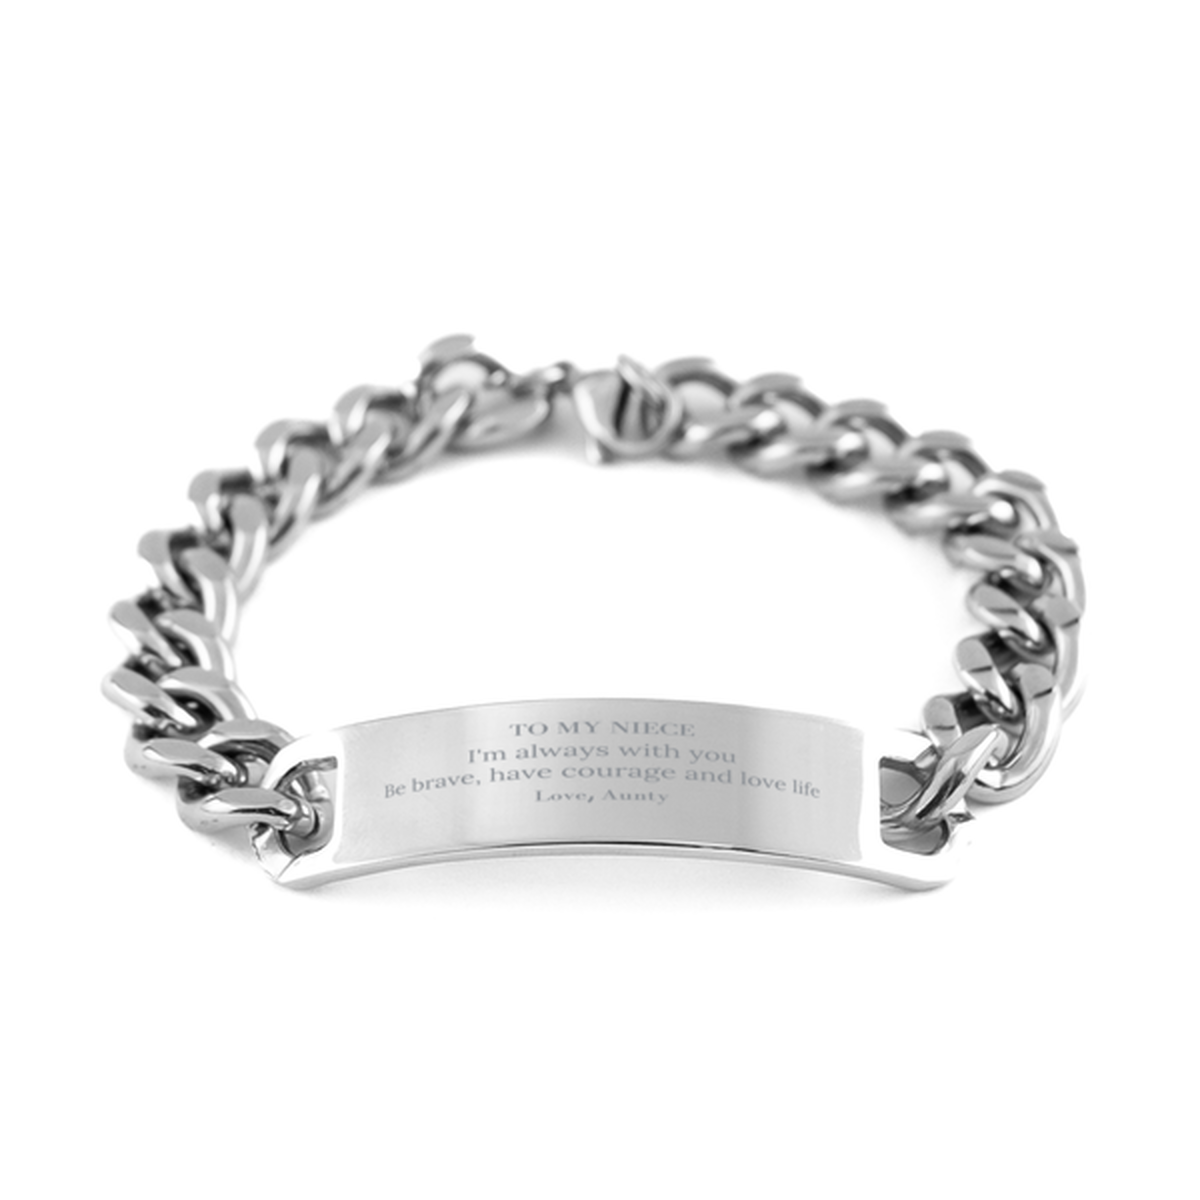 To My Niece Gifts from Aunty, Unique Cuban Chain Stainless Steel Bracelet Inspirational Christmas Birthday Graduation Gifts for Niece I'm always with you. Be brave, have courage and love life. Love, Aunty